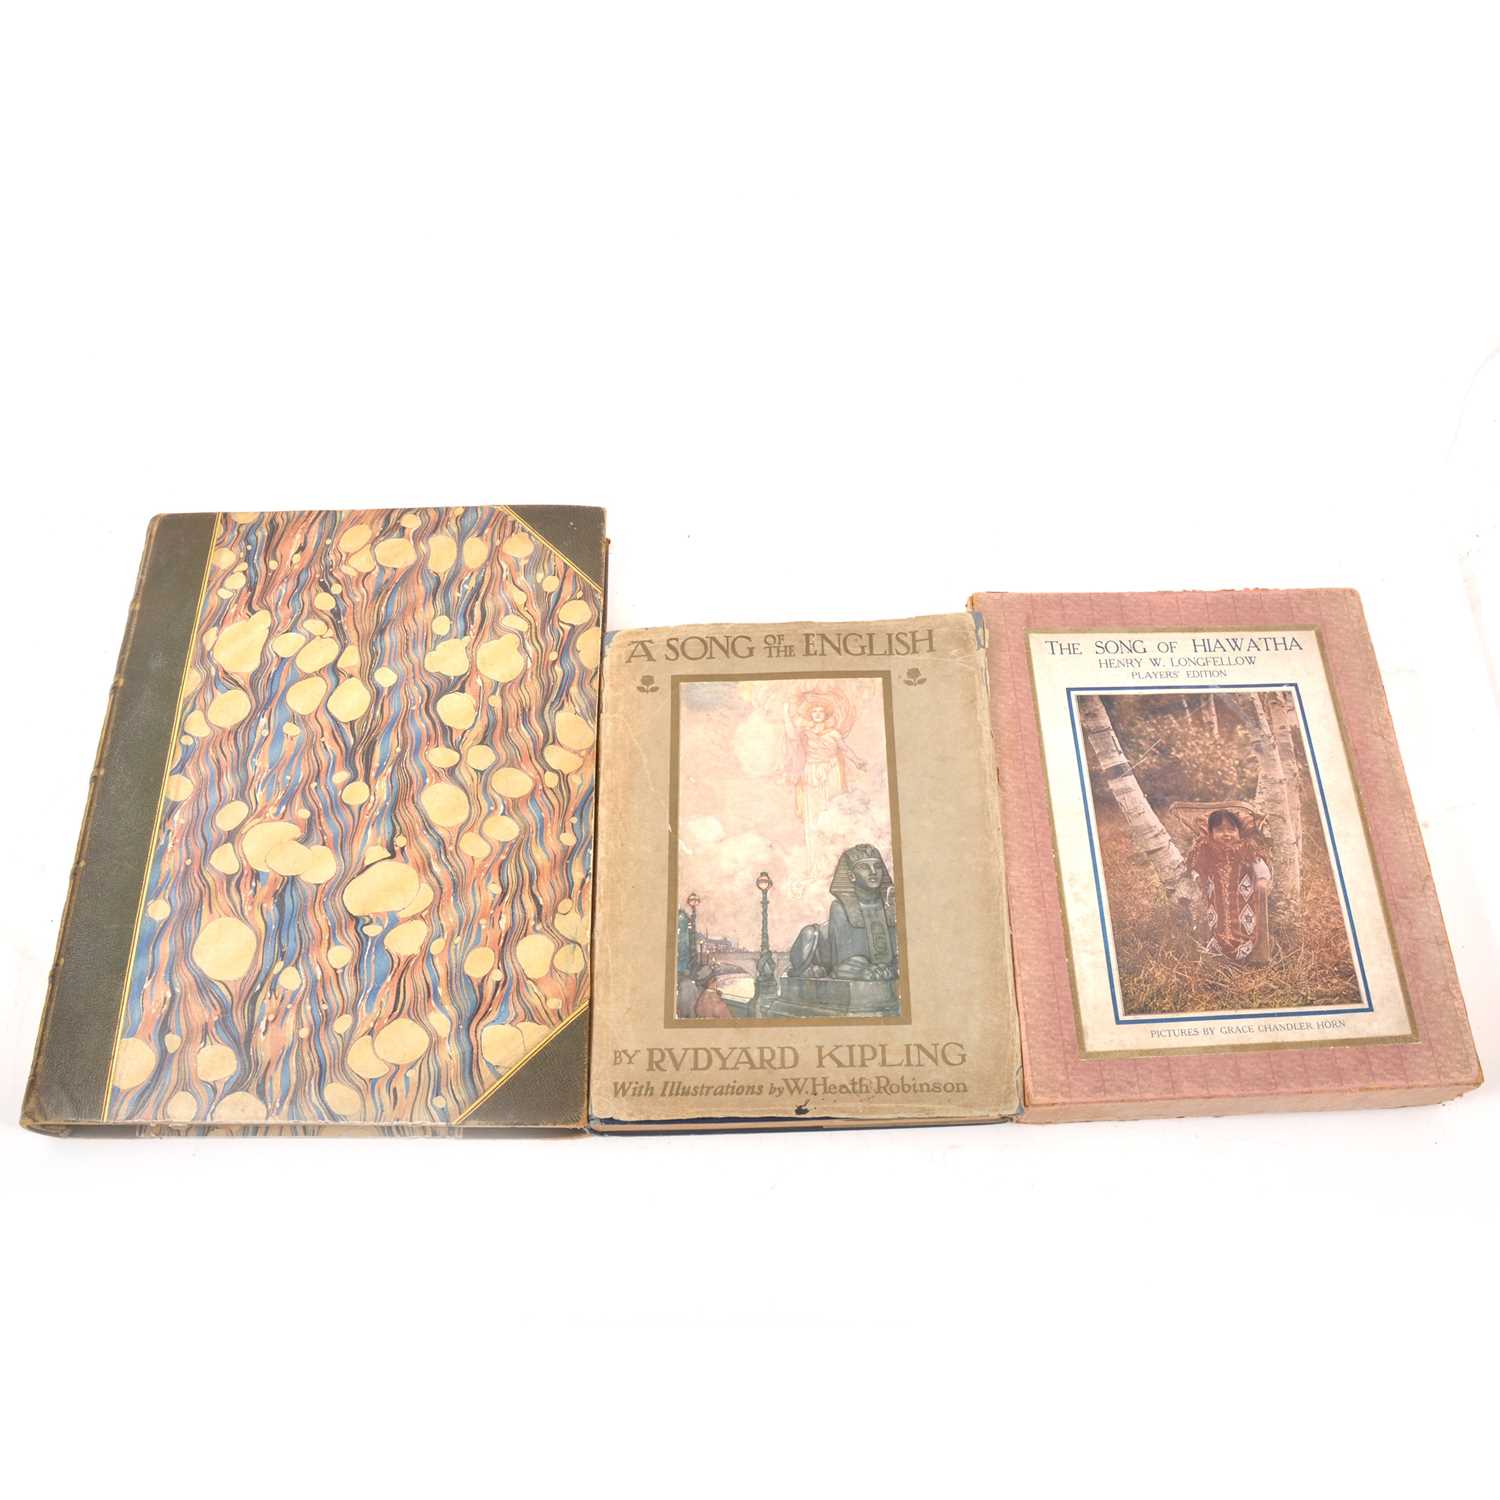 Lot 147 - Rudyard Kipling - 'A Song of the English', illustrated by W Heath Robinson, and two other books.